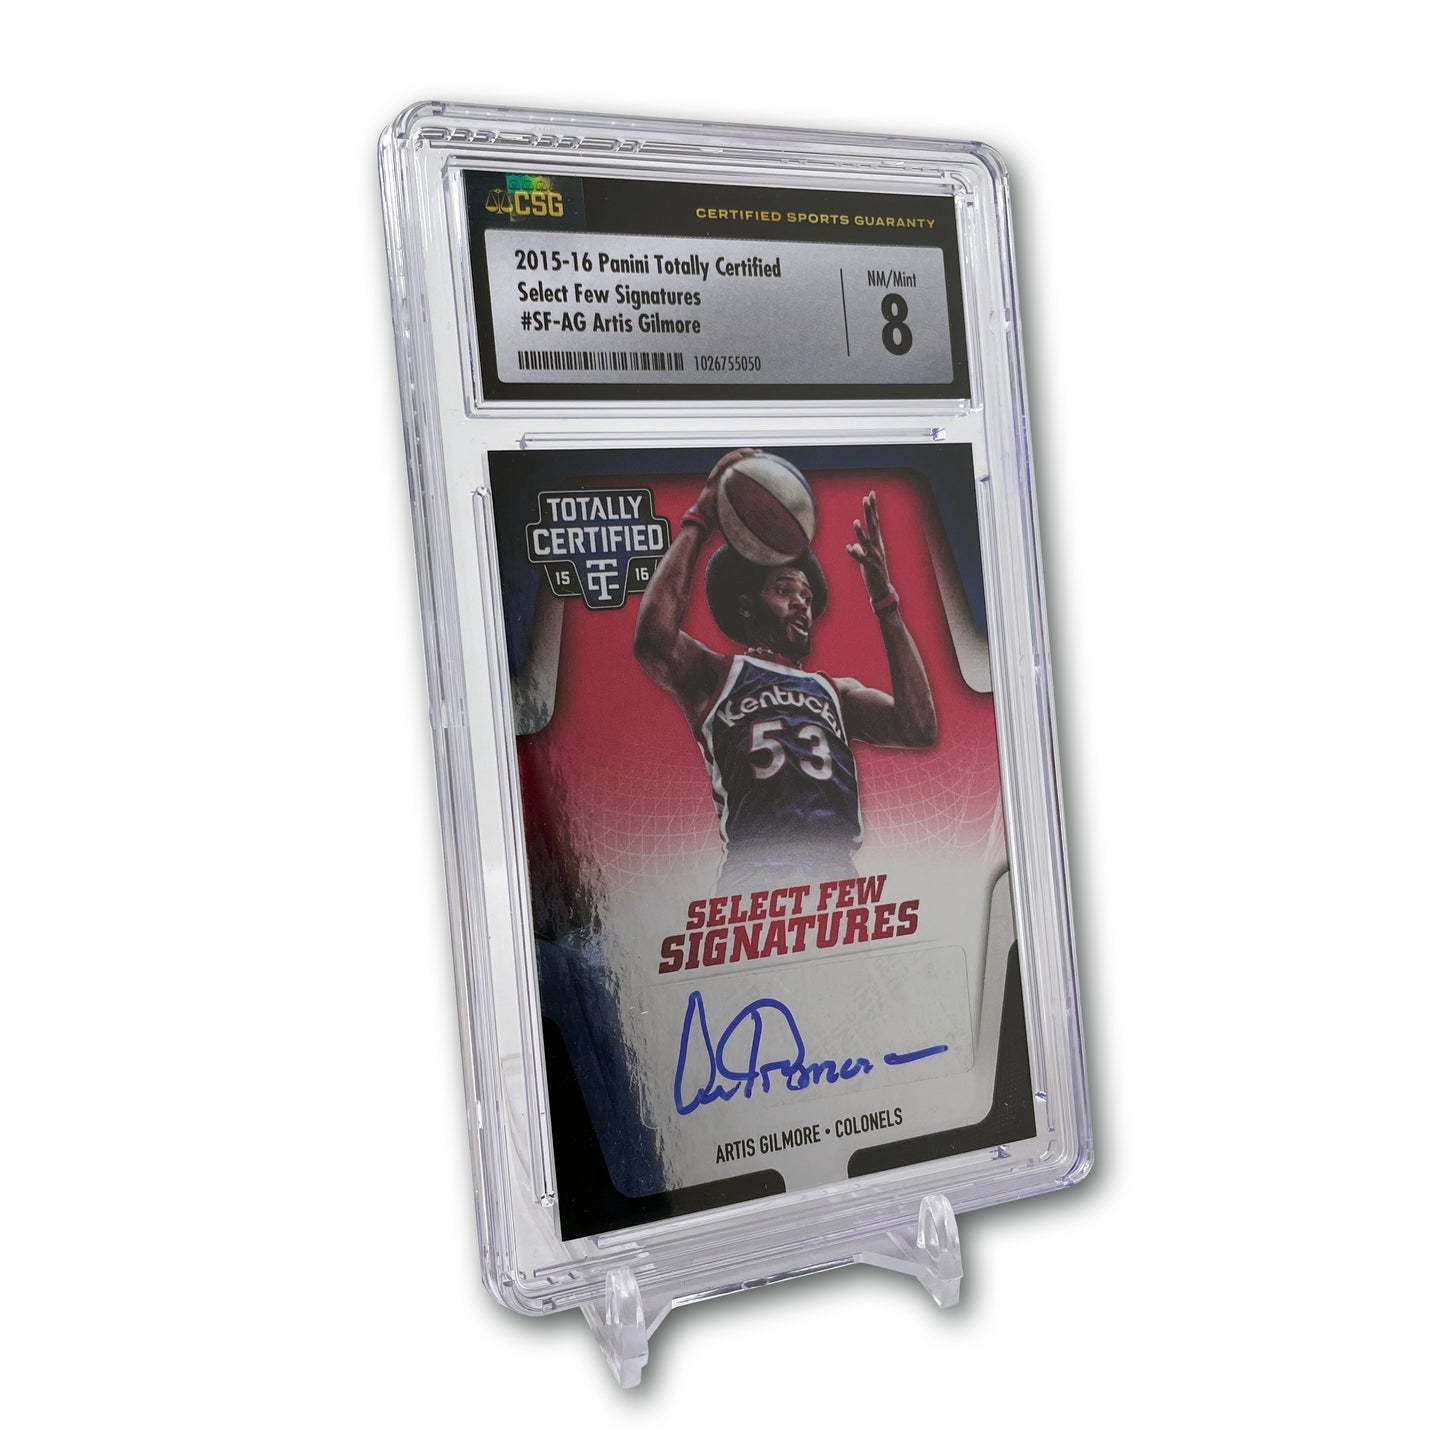 2015-16 Panini Totally Certified Select Few Signatures Artis Gilmore (NM/Mint 8)